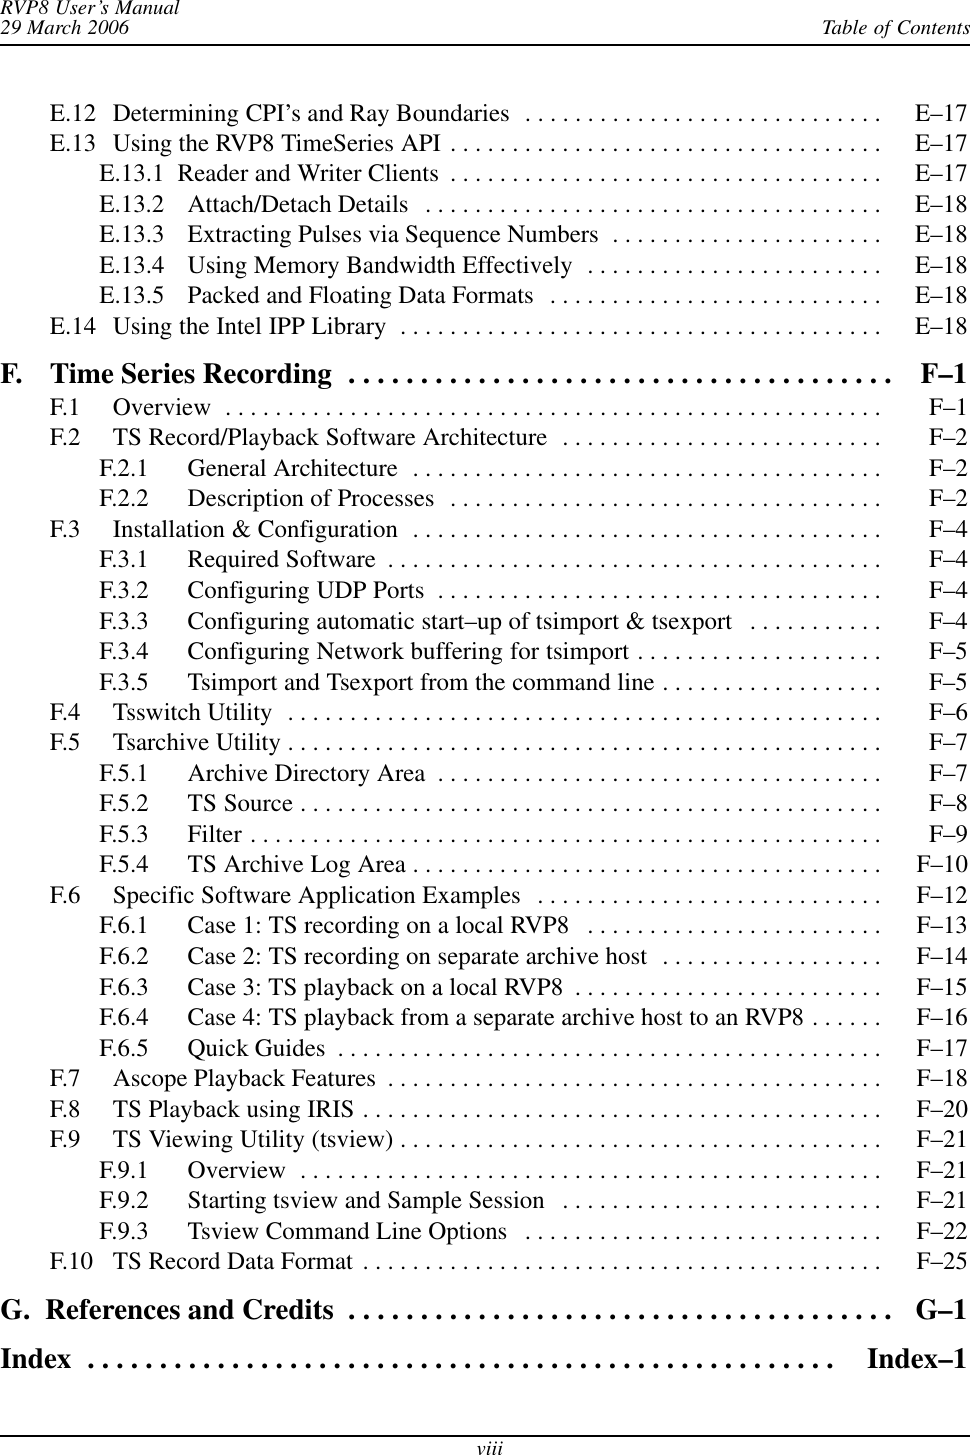 Table of ContentsRVP8 User’s Manual29 March 2006viiiE.12 Determining CPI’s and Ray Boundaries E–17 . . . . . . . . . . . . . . . . . . . . . . . . . . . . . E.13 Using the RVP8 TimeSeries API E–17 . . . . . . . . . . . . . . . . . . . . . . . . . . . . . . . . . . . E.13.1  Reader and Writer Clients E–17 . . . . . . . . . . . . . . . . . . . . . . . . . . . . . . . . . . . E.13.2 Attach/Detach Details E–18 . . . . . . . . . . . . . . . . . . . . . . . . . . . . . . . . . . . . . E.13.3 Extracting Pulses via Sequence Numbers E–18 . . . . . . . . . . . . . . . . . . . . . . E.13.4 Using Memory Bandwidth Effectively E–18 . . . . . . . . . . . . . . . . . . . . . . . . E.13.5 Packed and Floating Data Formats E–18 . . . . . . . . . . . . . . . . . . . . . . . . . . . E.14 Using the Intel IPP Library E–18 . . . . . . . . . . . . . . . . . . . . . . . . . . . . . . . . . . . . . . . F. Time Series Recording F–1 . . . . . . . . . . . . . . . . . . . . . . . . . . . . . . . . . . . . . . F.1 Overview F–1 . . . . . . . . . . . . . . . . . . . . . . . . . . . . . . . . . . . . . . . . . . . . . . . . . . . . . F.2 TS Record/Playback Software Architecture F–2 . . . . . . . . . . . . . . . . . . . . . . . . . . F.2.1 General Architecture F–2 . . . . . . . . . . . . . . . . . . . . . . . . . . . . . . . . . . . . . . F.2.2 Description of Processes F–2 . . . . . . . . . . . . . . . . . . . . . . . . . . . . . . . . . . . F.3 Installation &amp; Configuration F–4 . . . . . . . . . . . . . . . . . . . . . . . . . . . . . . . . . . . . . . F.3.1 Required Software F–4 . . . . . . . . . . . . . . . . . . . . . . . . . . . . . . . . . . . . . . . . F.3.2 Configuring UDP Ports F–4 . . . . . . . . . . . . . . . . . . . . . . . . . . . . . . . . . . . . F.3.3 Configuring automatic start–up of tsimport &amp; tsexport F–4 . . . . . . . . . . . F.3.4 Configuring Network buffering for tsimport F–5 . . . . . . . . . . . . . . . . . . . . F.3.5 Tsimport and Tsexport from the command line F–5 . . . . . . . . . . . . . . . . . . F.4 Tsswitch Utility F–6 . . . . . . . . . . . . . . . . . . . . . . . . . . . . . . . . . . . . . . . . . . . . . . . . F.5 Tsarchive Utility F–7 . . . . . . . . . . . . . . . . . . . . . . . . . . . . . . . . . . . . . . . . . . . . . . . . F.5.1 Archive Directory Area F–7 . . . . . . . . . . . . . . . . . . . . . . . . . . . . . . . . . . . . F.5.2 TS Source F–8 . . . . . . . . . . . . . . . . . . . . . . . . . . . . . . . . . . . . . . . . . . . . . . . F.5.3 Filter F–9 . . . . . . . . . . . . . . . . . . . . . . . . . . . . . . . . . . . . . . . . . . . . . . . . . . . F.5.4 TS Archive Log Area F–10 . . . . . . . . . . . . . . . . . . . . . . . . . . . . . . . . . . . . . . F.6 Specific Software Application Examples F–12 . . . . . . . . . . . . . . . . . . . . . . . . . . . . F.6.1 Case 1: TS recording on a local RVP8 F–13 . . . . . . . . . . . . . . . . . . . . . . . . F.6.2 Case 2: TS recording on separate archive host F–14 . . . . . . . . . . . . . . . . . . F.6.3 Case 3: TS playback on a local RVP8 F–15 . . . . . . . . . . . . . . . . . . . . . . . . . F.6.4 Case 4: TS playback from a separate archive host to an RVP8 F–16 . . . . . . F.6.5 Quick Guides F–17 . . . . . . . . . . . . . . . . . . . . . . . . . . . . . . . . . . . . . . . . . . . . F.7 Ascope Playback Features F–18 . . . . . . . . . . . . . . . . . . . . . . . . . . . . . . . . . . . . . . . . F.8 TS Playback using IRIS F–20 . . . . . . . . . . . . . . . . . . . . . . . . . . . . . . . . . . . . . . . . . . F.9 TS Viewing Utility (tsview) F–21 . . . . . . . . . . . . . . . . . . . . . . . . . . . . . . . . . . . . . . . F.9.1 Overview F–21 . . . . . . . . . . . . . . . . . . . . . . . . . . . . . . . . . . . . . . . . . . . . . . . F.9.2 Starting tsview and Sample Session F–21 . . . . . . . . . . . . . . . . . . . . . . . . . . F.9.3 Tsview Command Line Options F–22 . . . . . . . . . . . . . . . . . . . . . . . . . . . . . F.10 TS Record Data Format F–25 . . . . . . . . . . . . . . . . . . . . . . . . . . . . . . . . . . . . . . . . . . G.  References and Credits G–1 . . . . . . . . . . . . . . . . . . . . . . . . . . . . . . . . . . . . . . Index Index–1 . . . . . . . . . . . . . . . . . . . . . . . . . . . . . . . . . . . . . . . . . . . . . . . . . . . . 